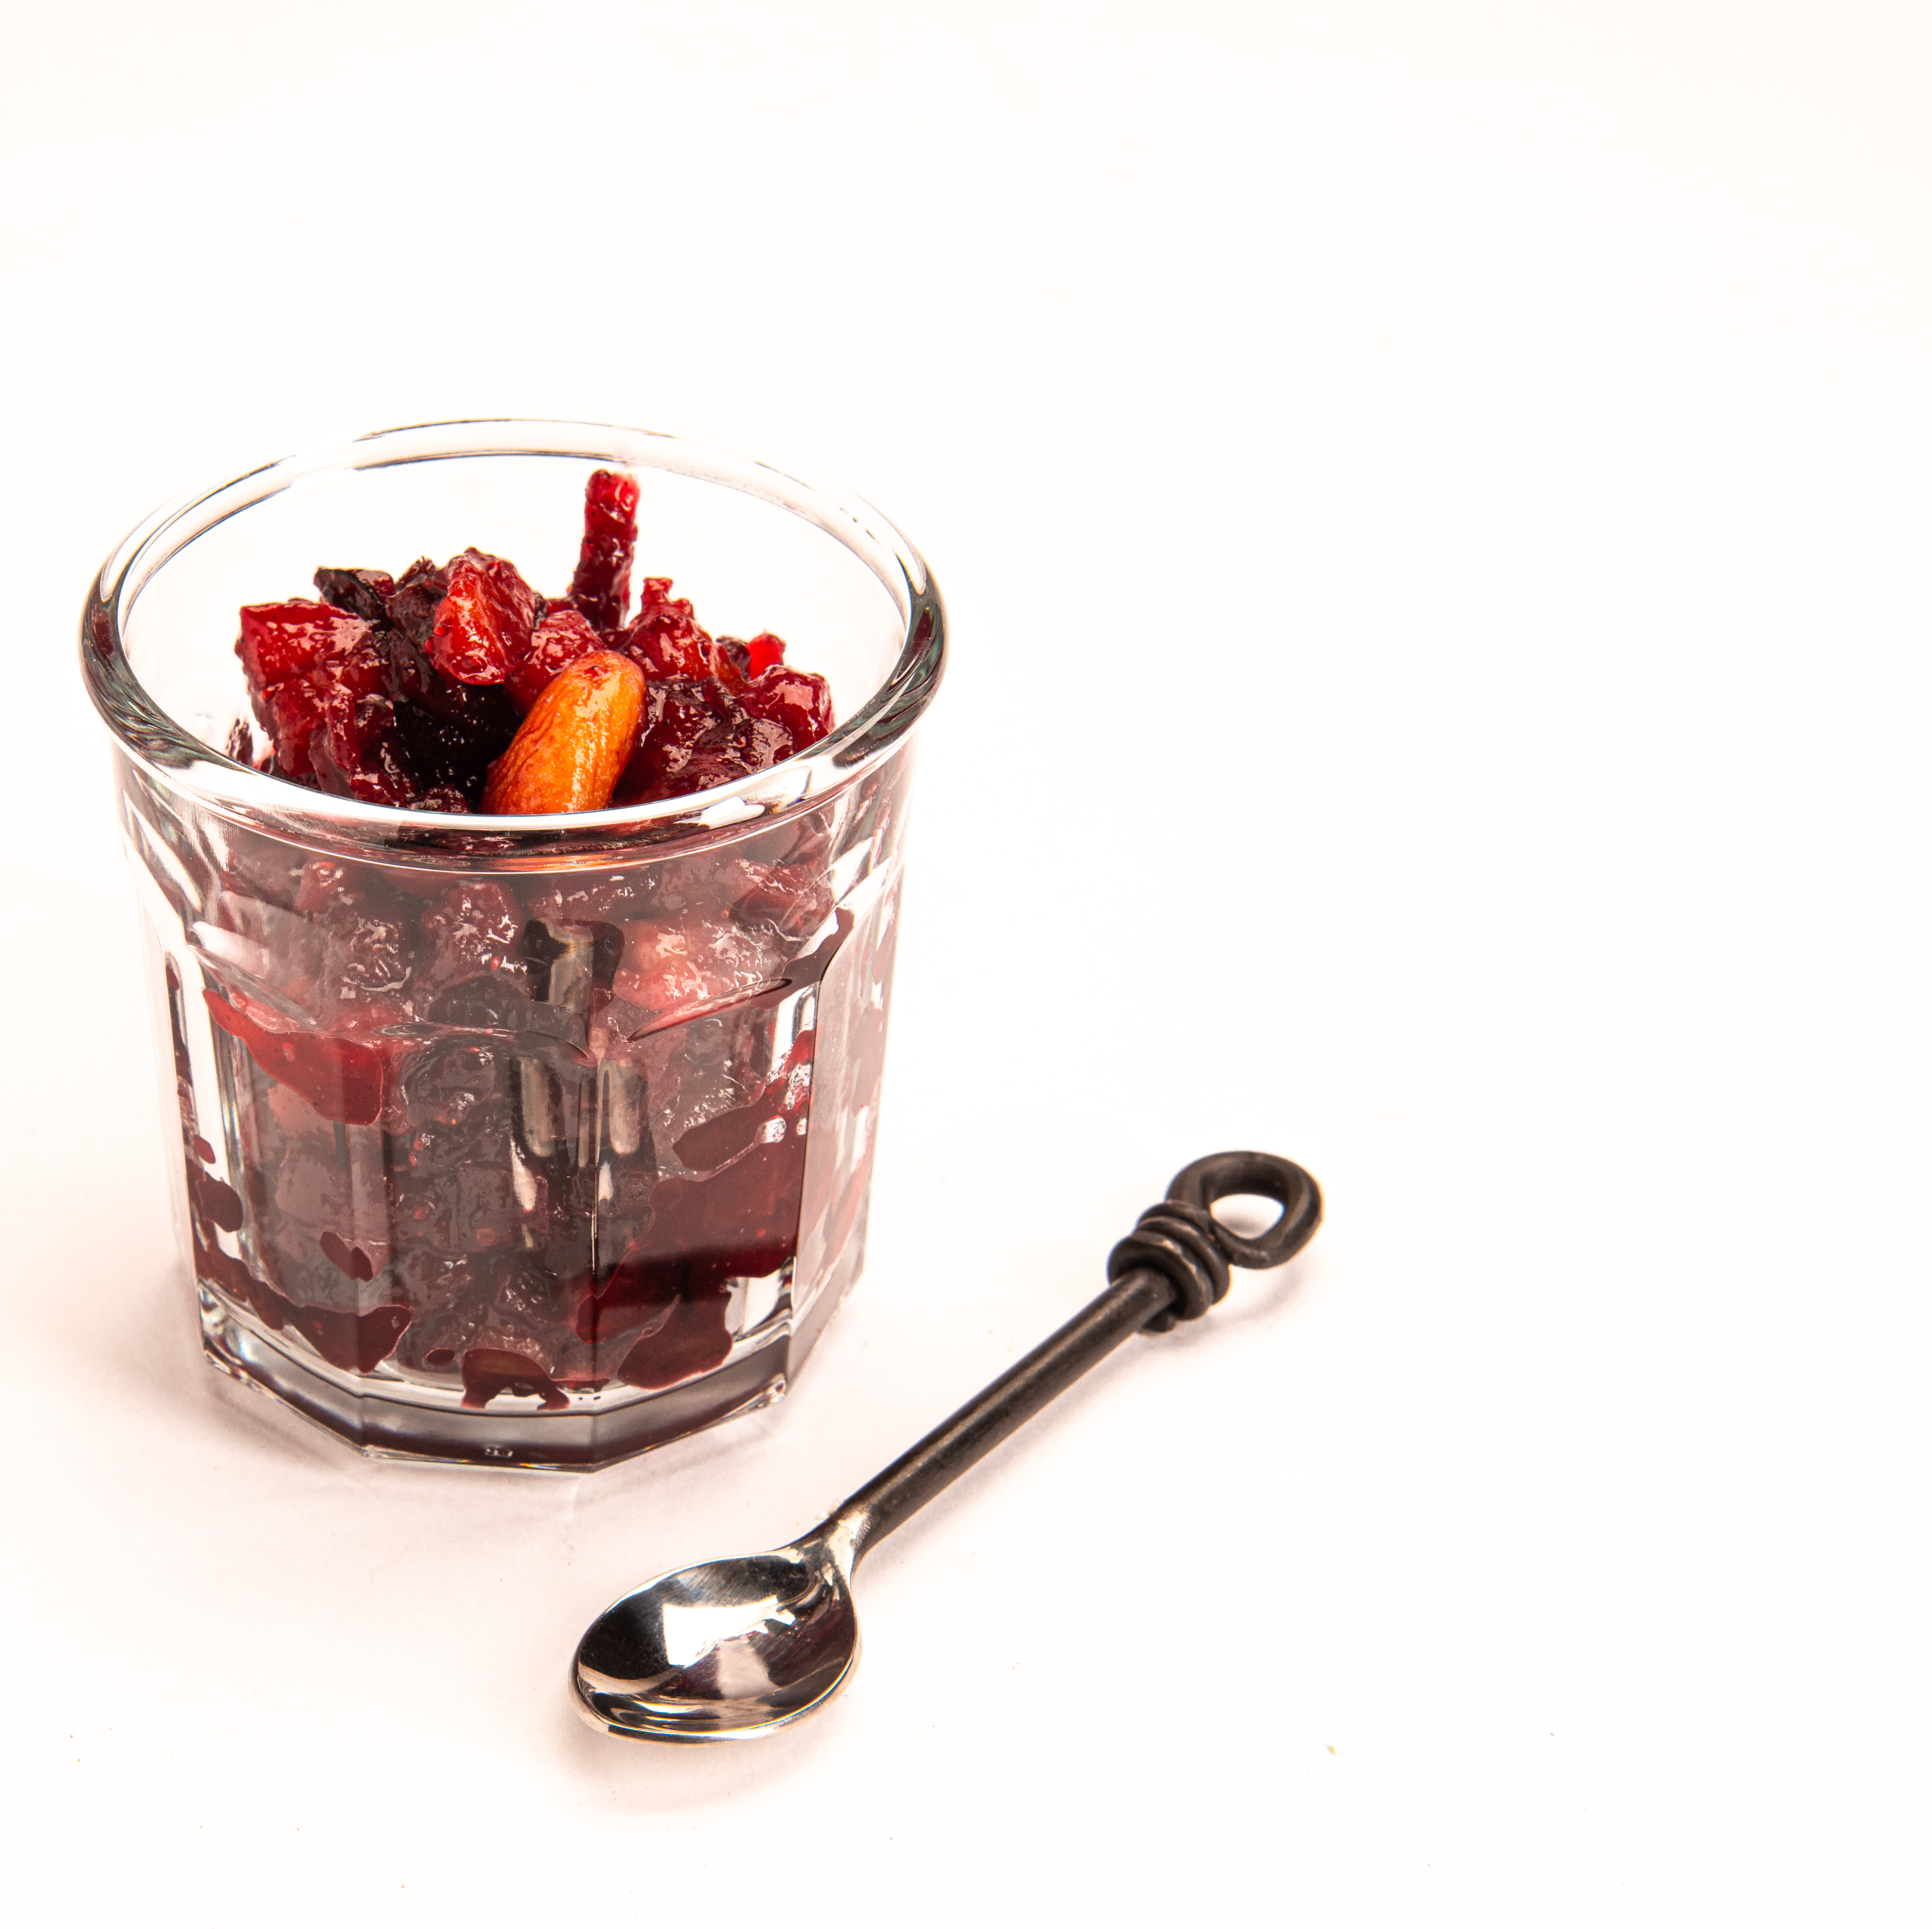 No Same Old Same Old Here: Cranberry Chutney